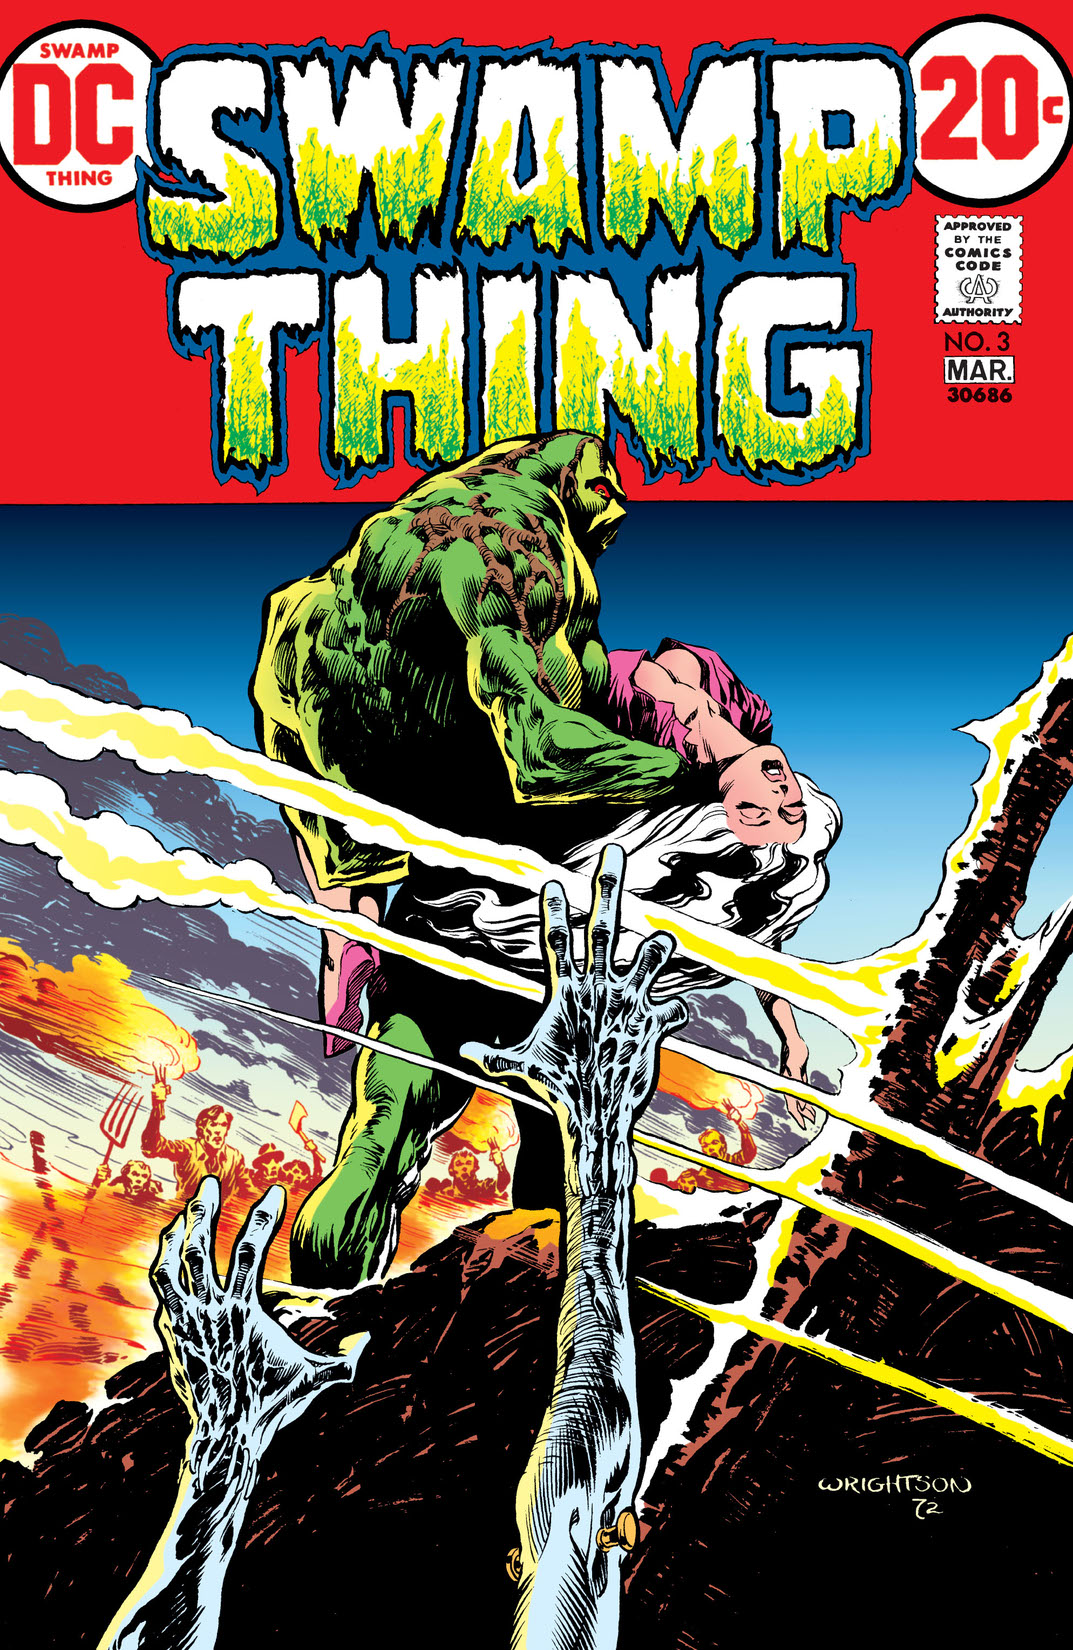 Swamp Thing (1972-) #3 preview images